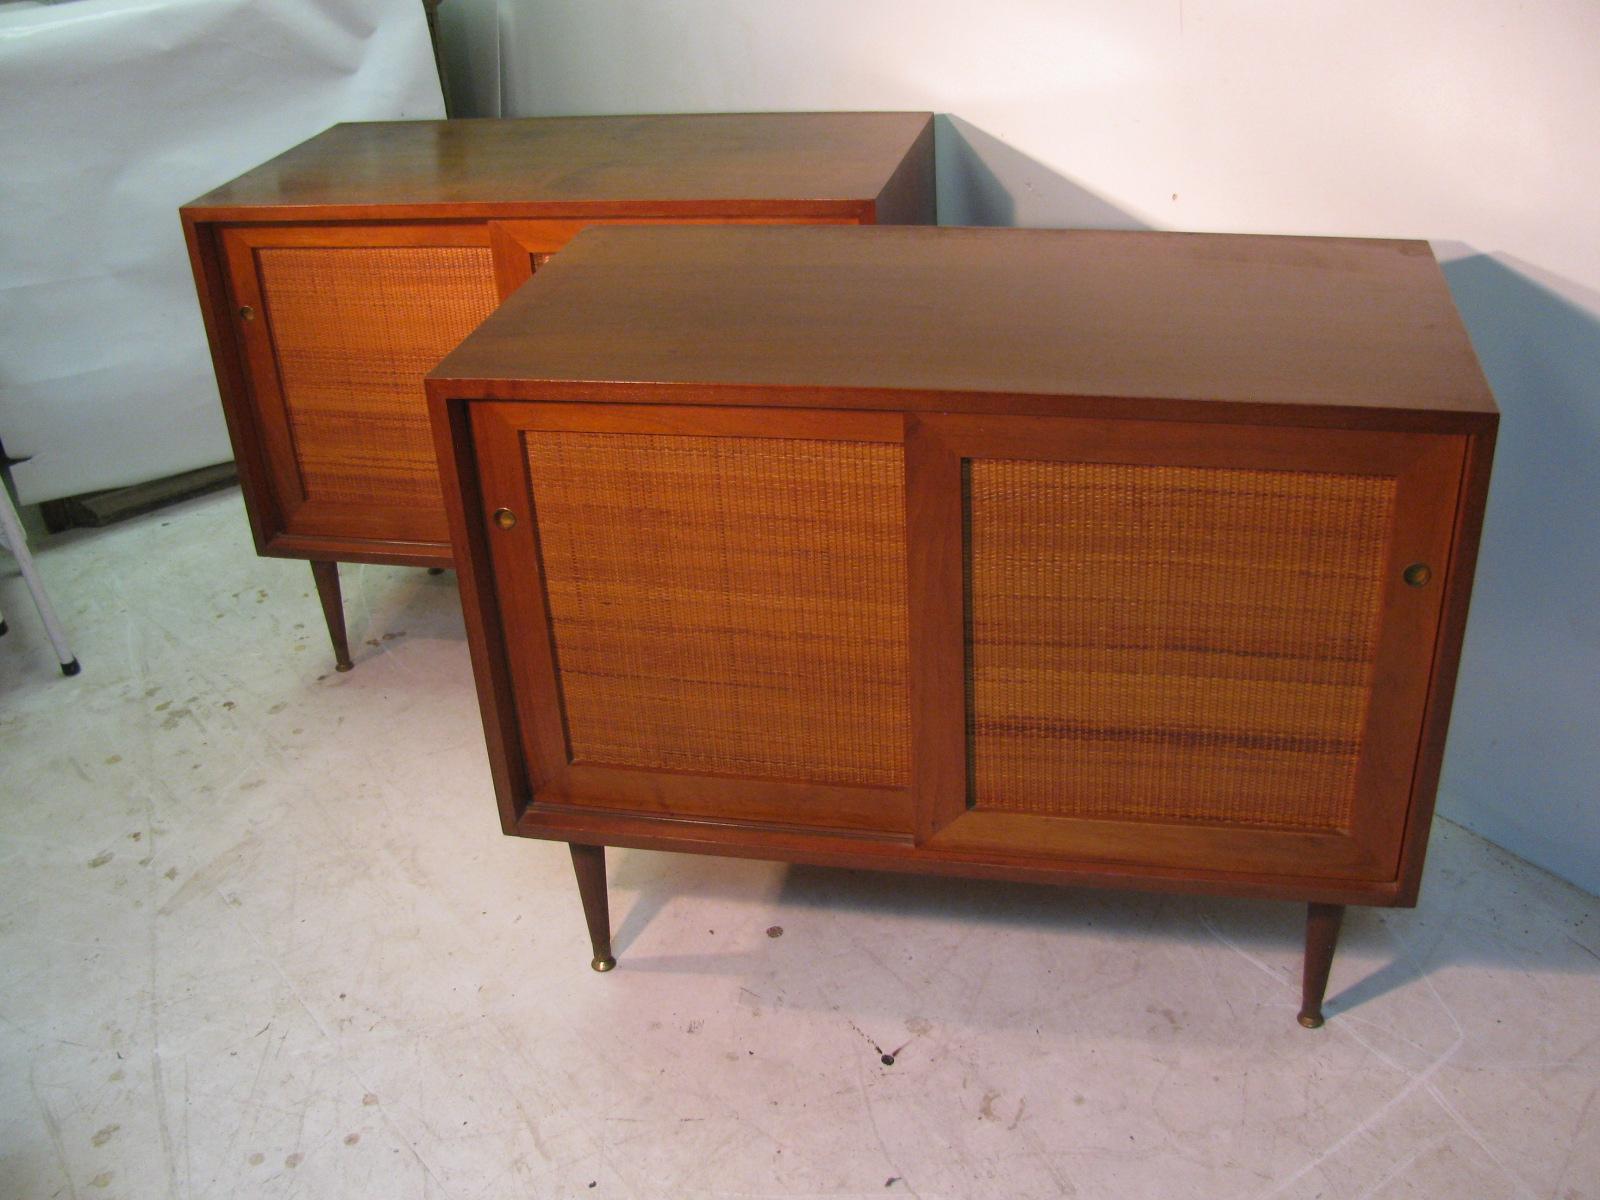 Fabulous matching pair of walnut Credenzas which are small enough to work in several areas. Possibly separated and used in the bedroom or put together to use in the dining area. Each cabinet has two sliding doors and a shelf inside. Would work very